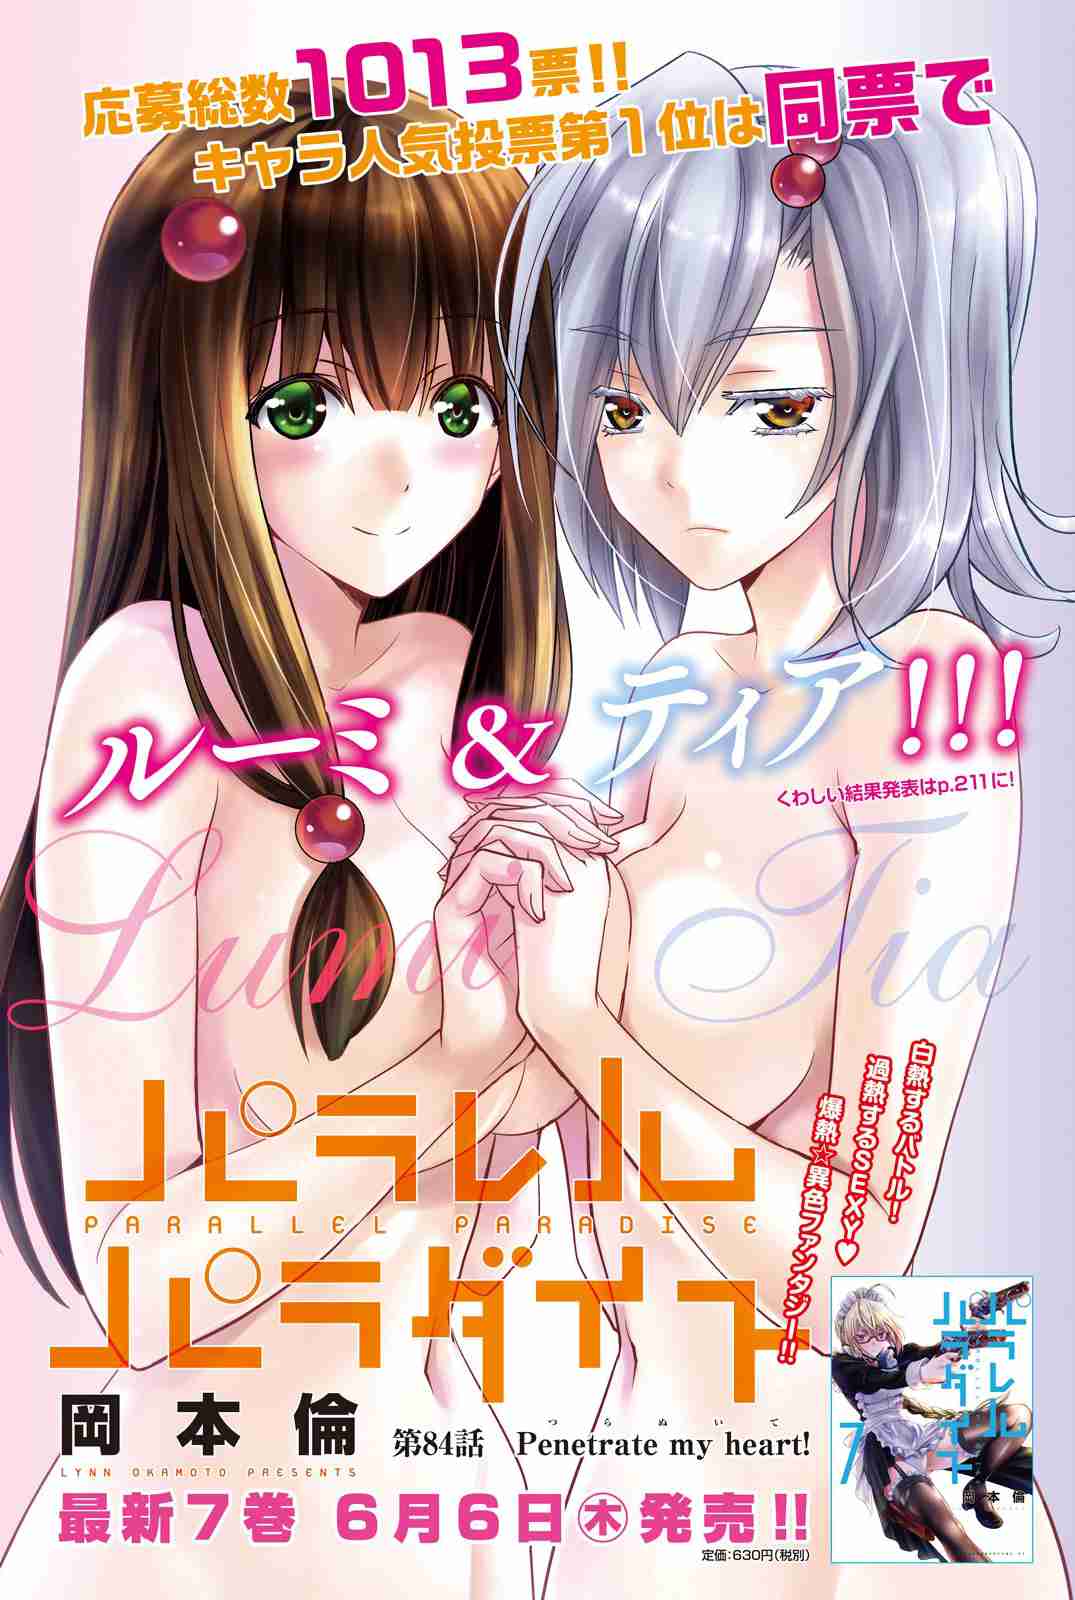 Parallel Paradise Ch. 84 Penetrate My Heart!